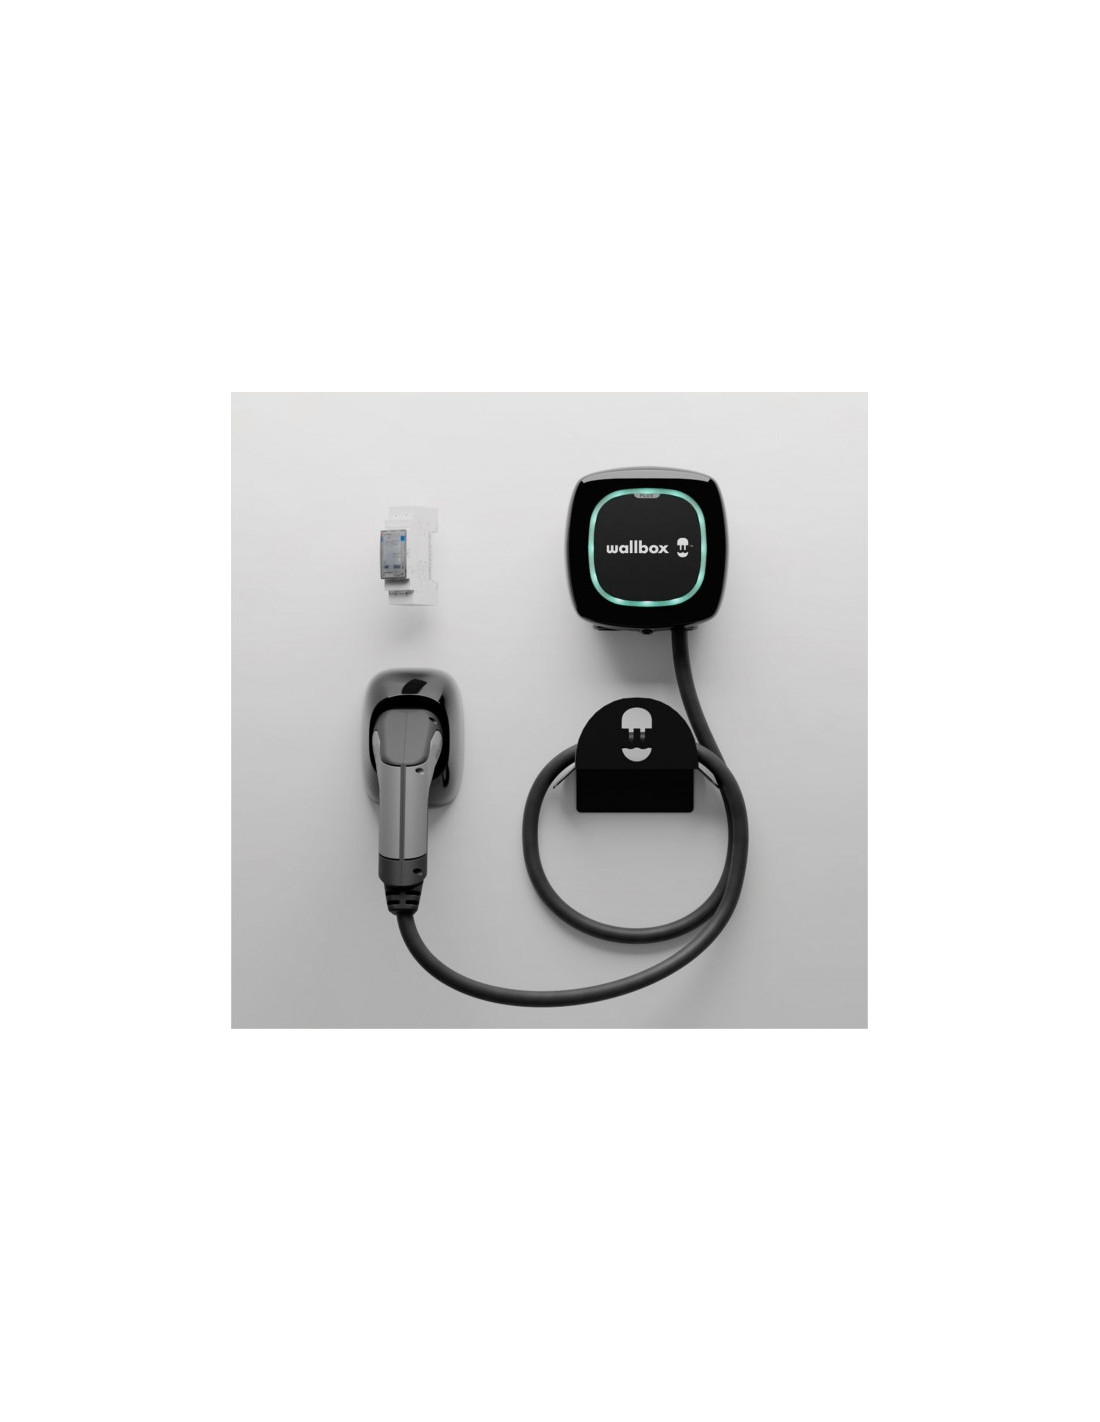 Kit charger, holder Powerboost Pulsar Cable EV 22kW 2, Plus Wallbox 5m, + Power type +